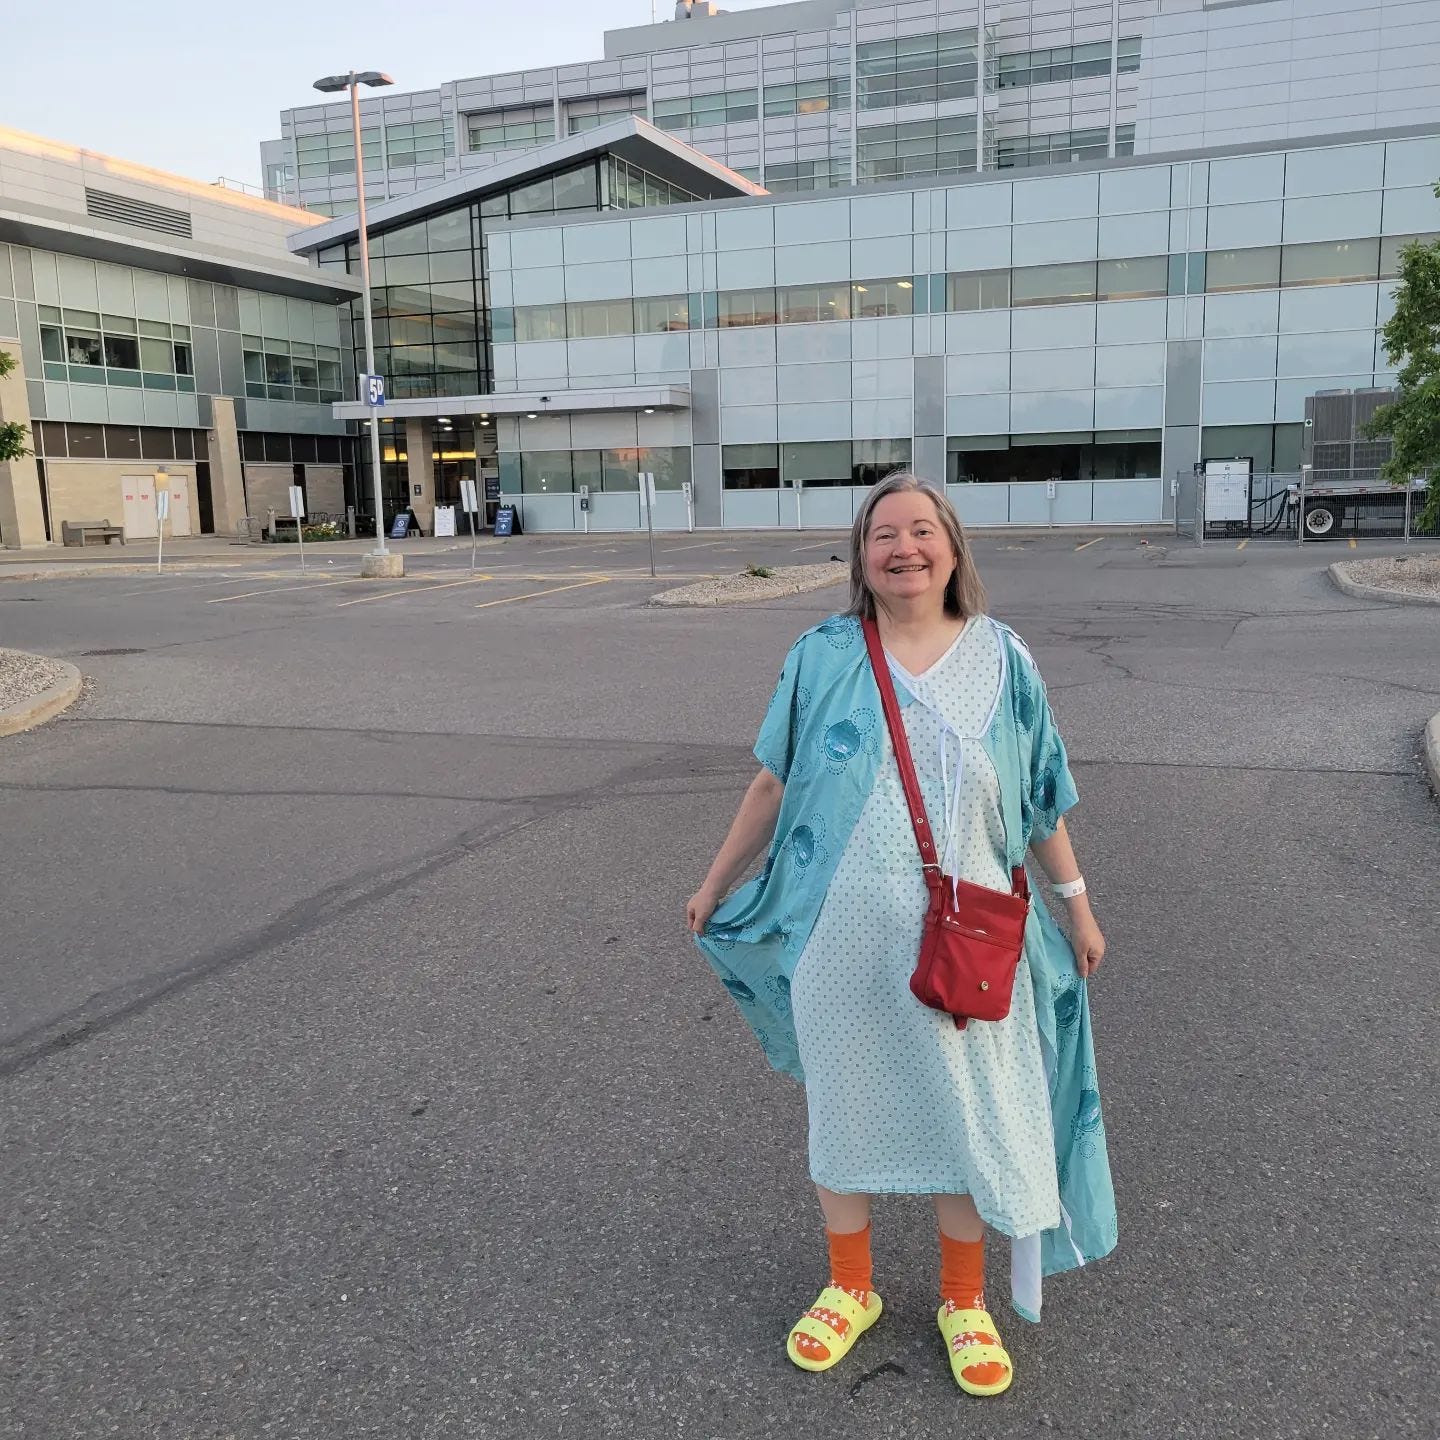 woman in middle of hospital parking lot in hosital gown, smiling.